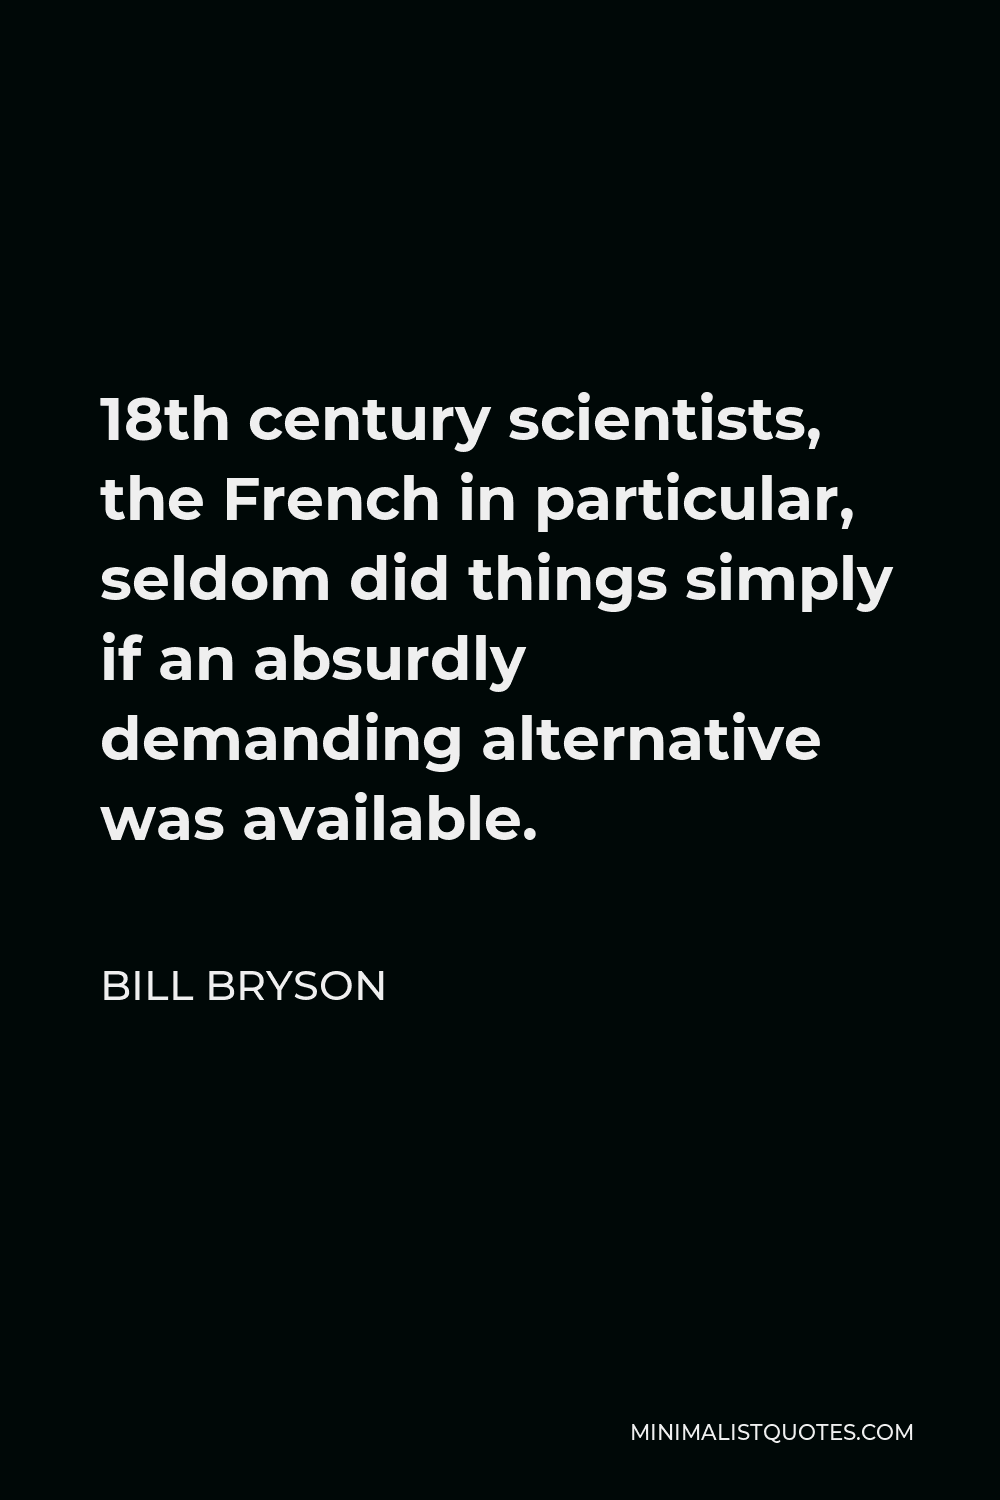 Bill Bryson Quote - 18th century scientists, the French in particular, seldom did things simply if an absurdly demanding alternative was available.